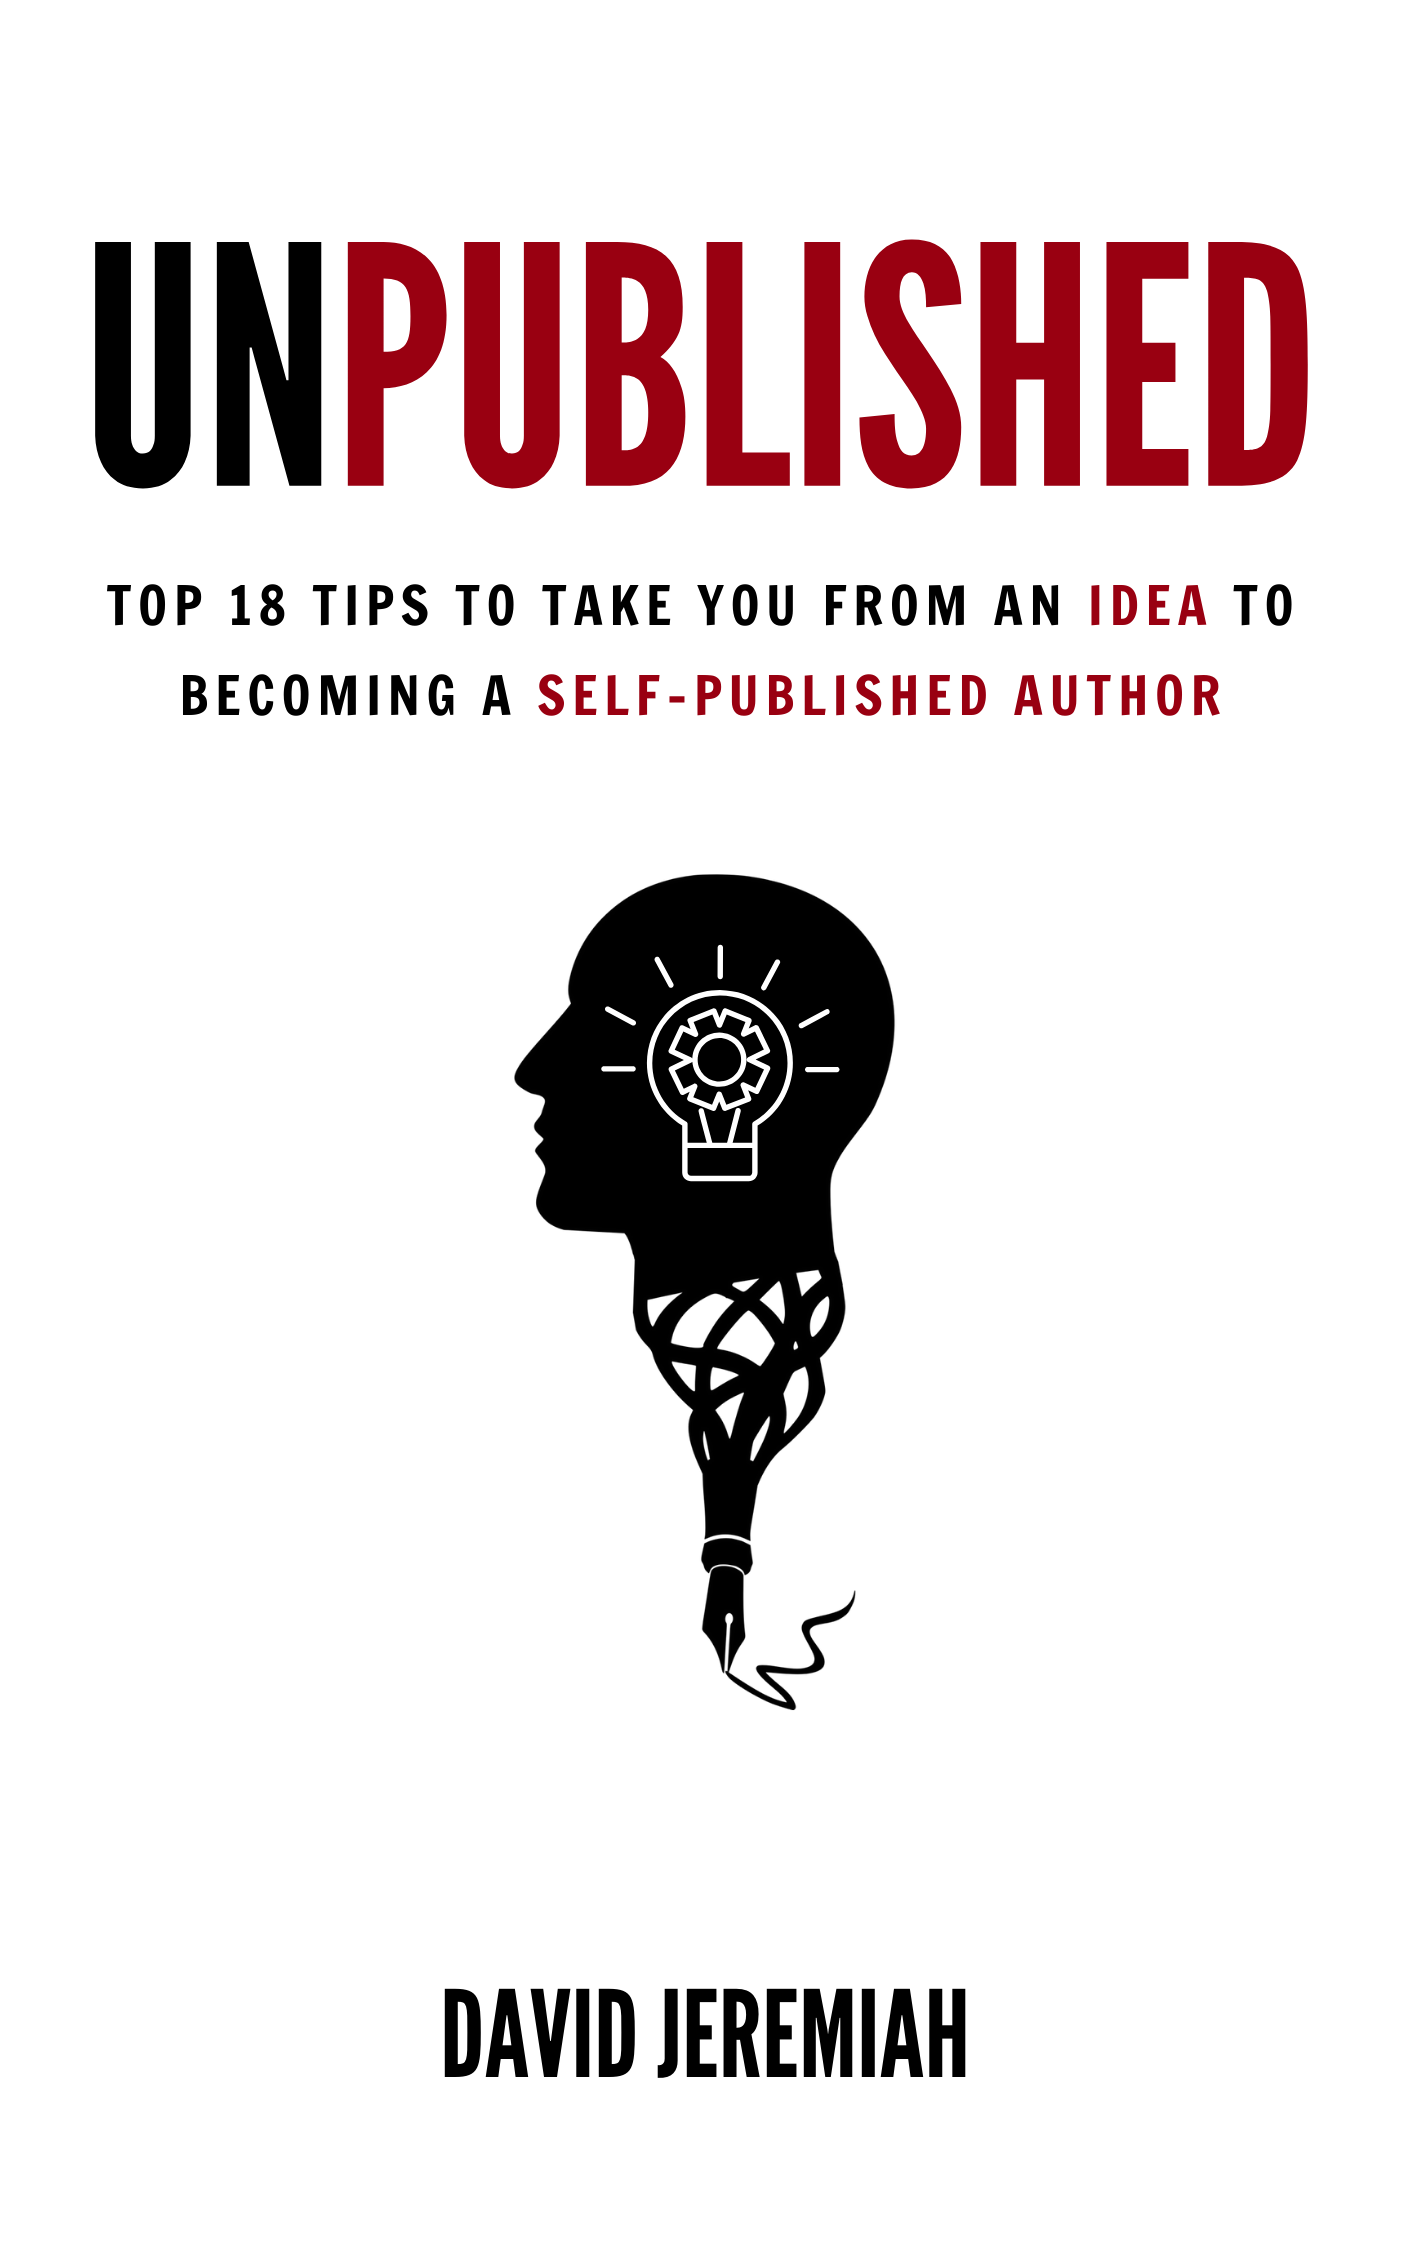 FREE: Unpublished: Top 18 Tips to Take You from An Idea to Becoming A Self-Published Author by David Jeremiah by David Jeremiah